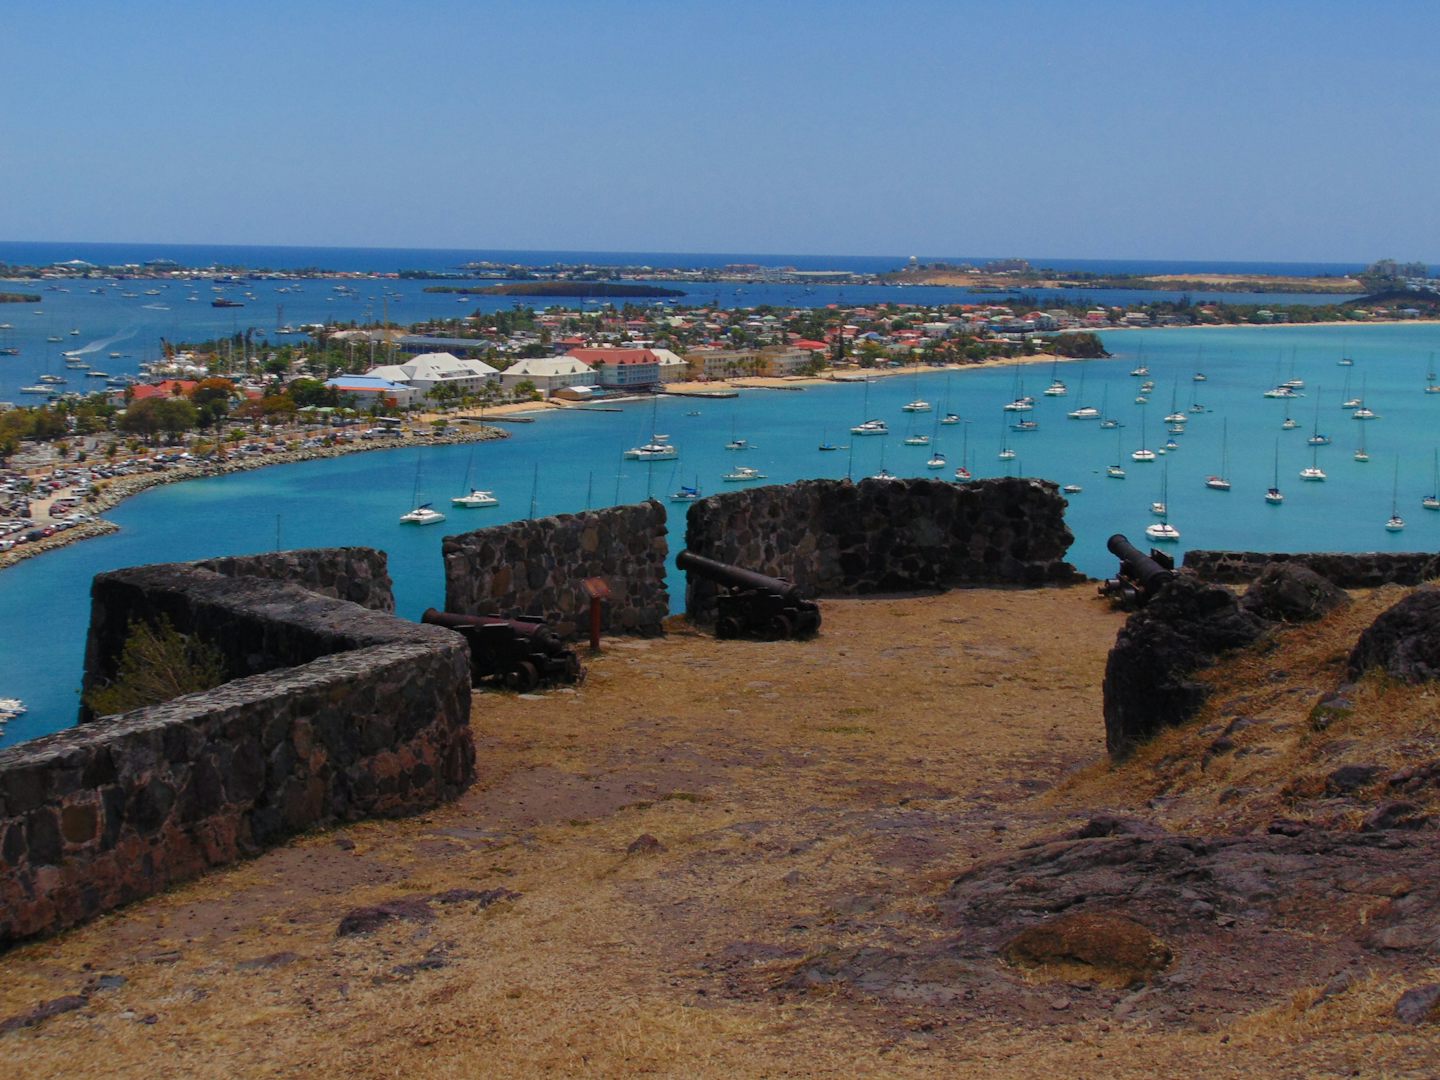 View from atop Fort Louis in Marigot, St. Martin.